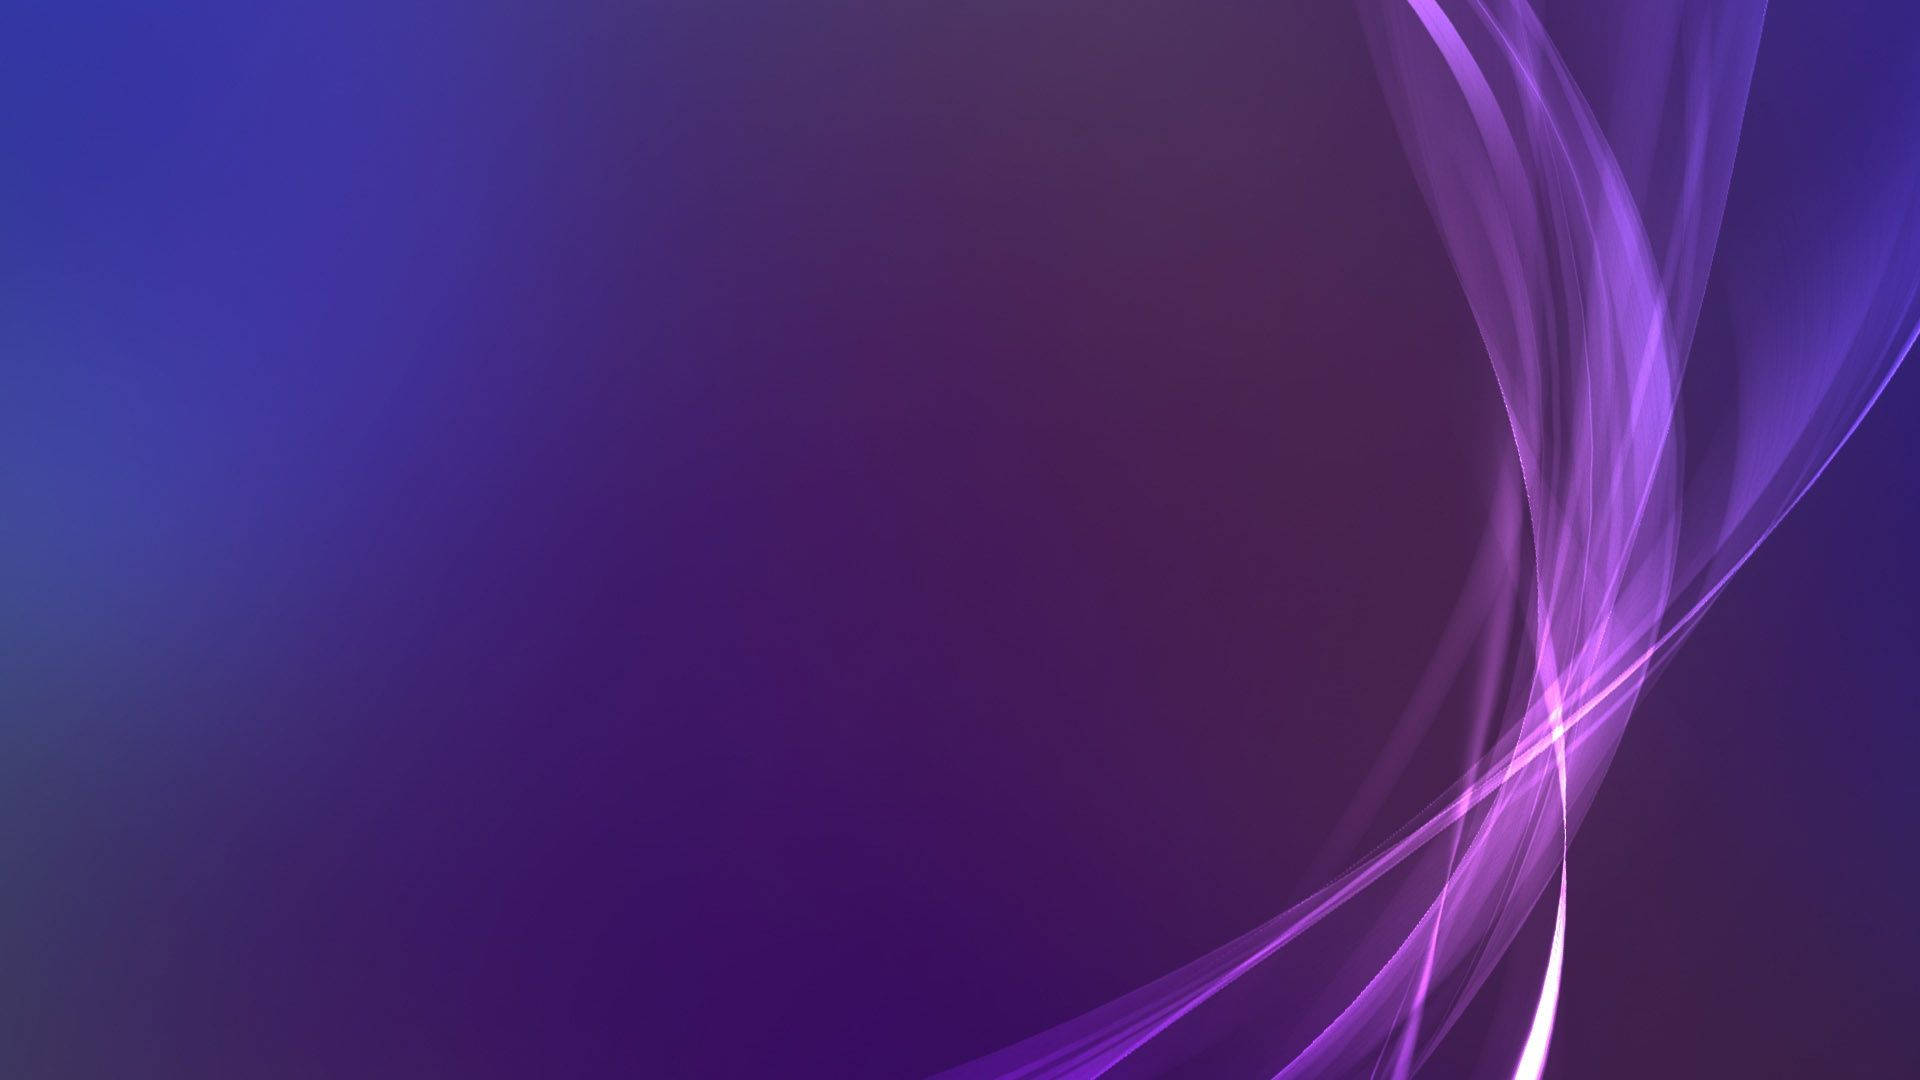 A Purple And Blue Abstract Background With A Wave Pattern Wallpaper